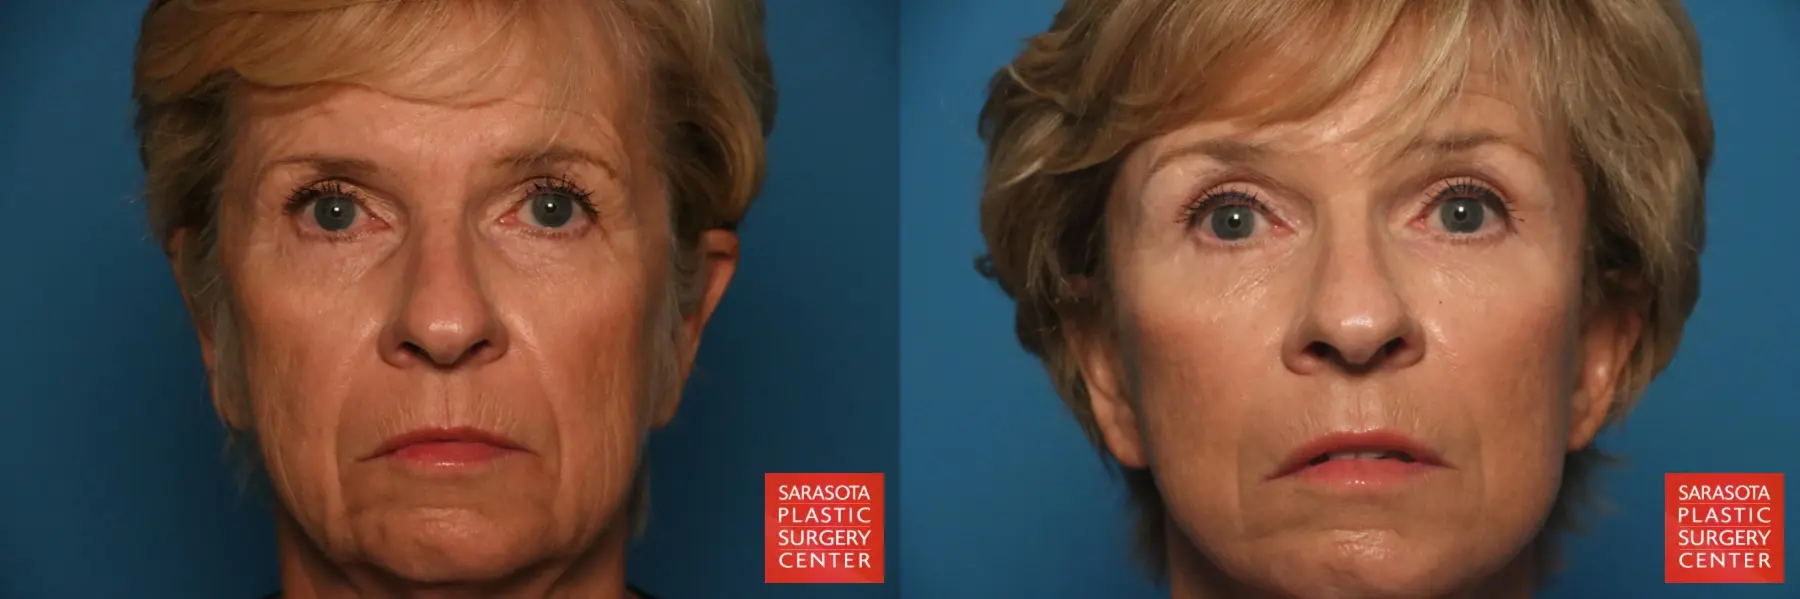 Brow Lift: Patient 5 - Before and After 1